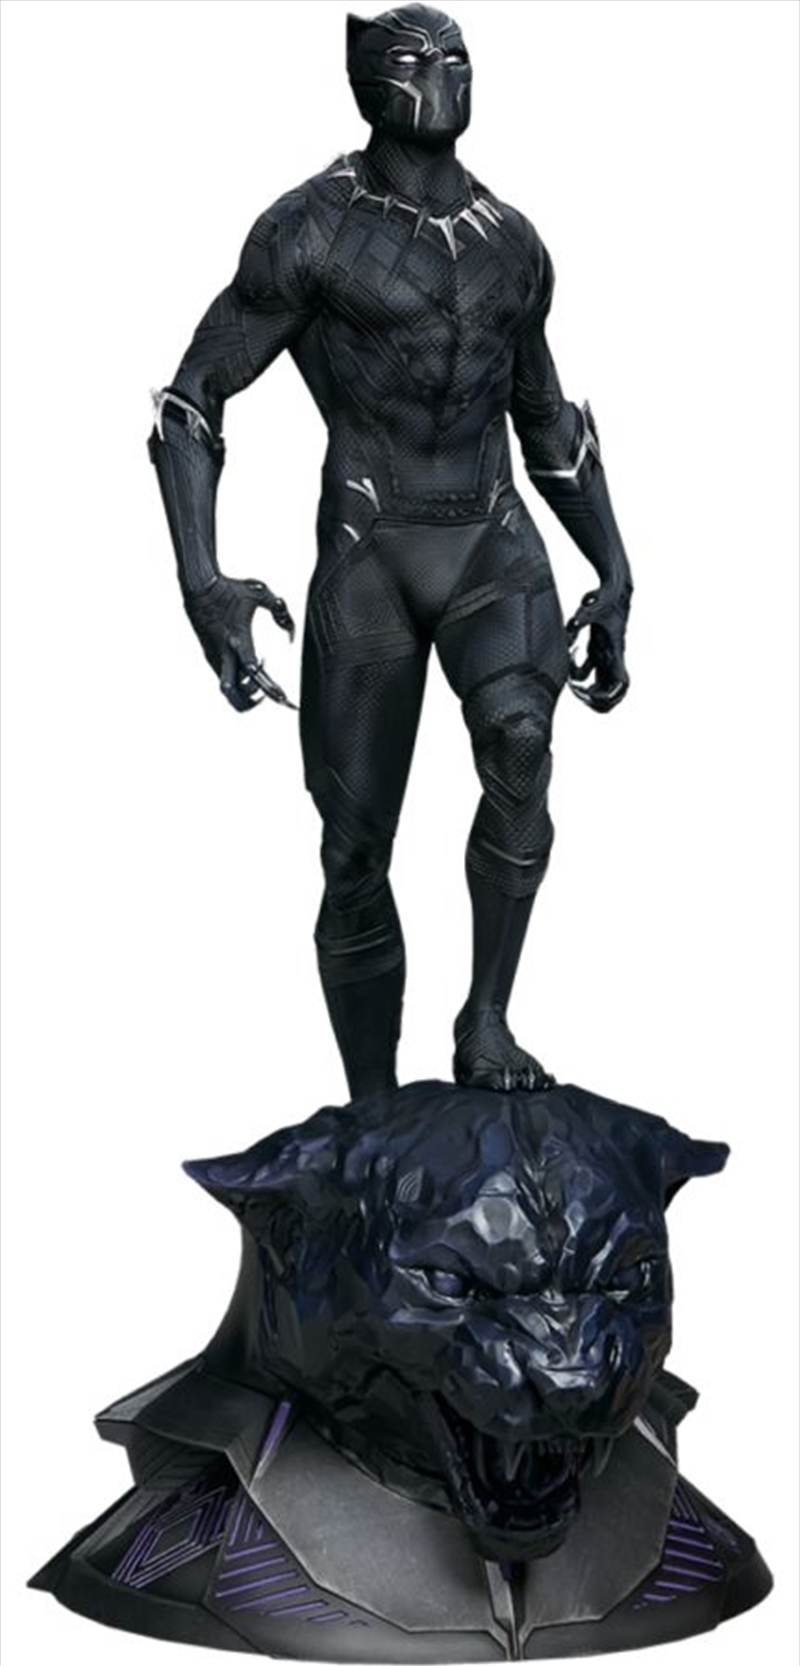 Black Panther - Black Panther Premium Format Statue/Product Detail/Statues